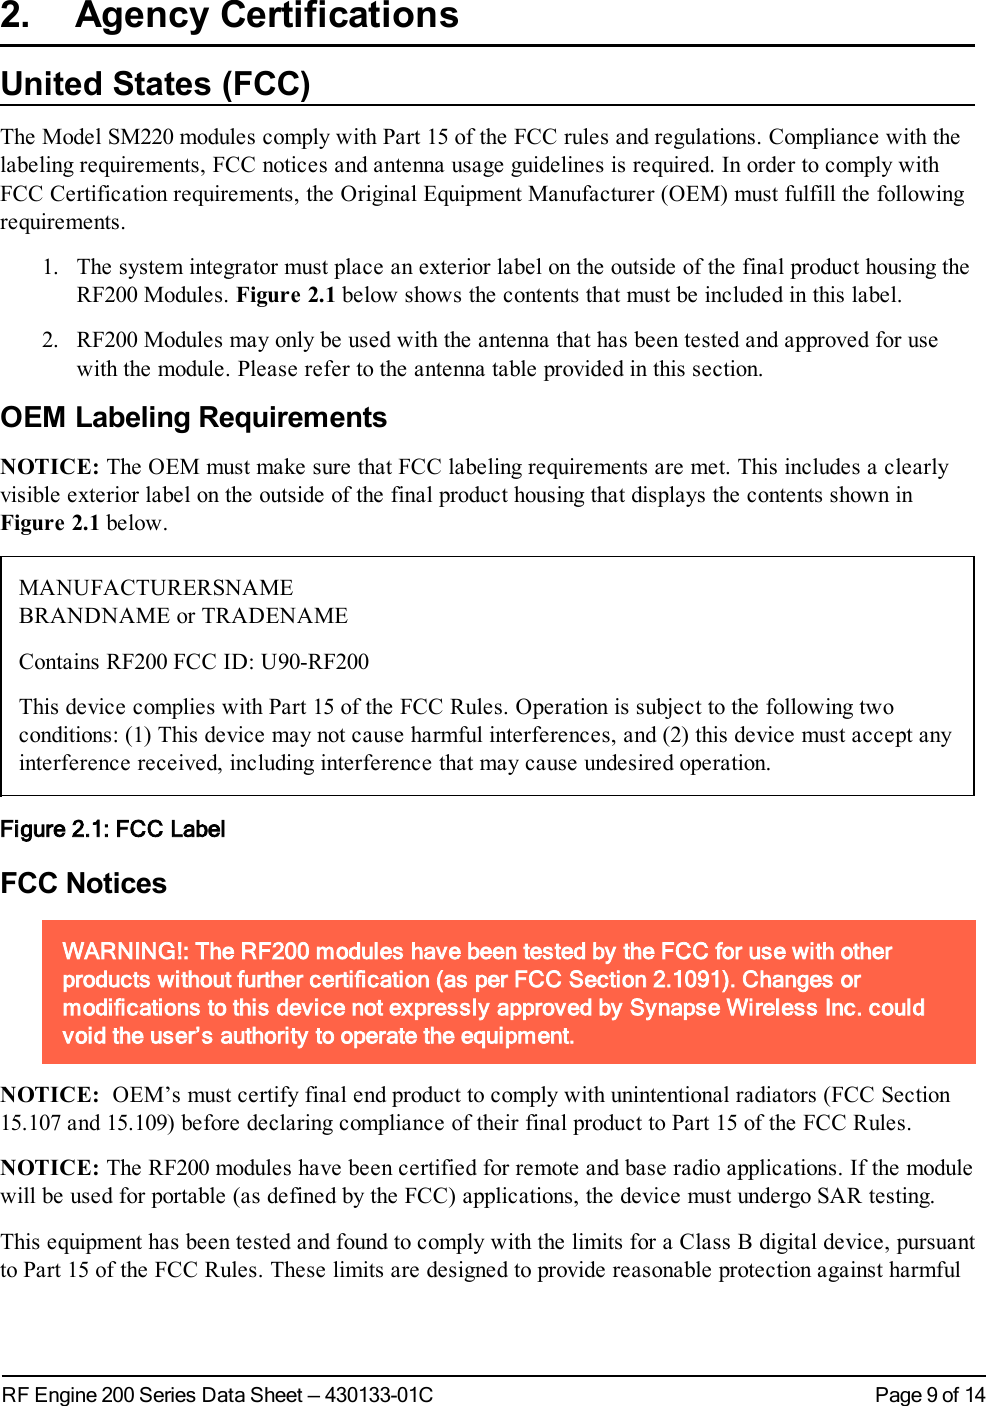 Page 9 of 14RF Engine 200 Series Data Sheet — 430133-01C2. Agency CertificationsUnited States (FCC)The Model SM220 modules comply with Part 15 of the FCC rules and regulations. Compliance with thelabeling requirements, FCC notices and antenna usage guidelines is required. In order to comply withFCC Certification requirements, the Original Equipment Manufacturer (OEM) must fulfill the followingrequirements.1. The system integrator must place an exterior label on the outside of the final product housing theRF200 Modules. Figure 2.1 below shows the contents that must be included in this label.2. RF200 Modules may only be used with the antenna that has been tested and approved for usewith the module. Please refer to the antenna table provided in this section.OEM Labeling RequirementsNOTICE: The OEM must make sure that FCC labeling requirements are met. This includes a clearlyvisible exterior label on the outside of the final product housing that displays the contents shown inFigure 2.1 below.MANUFACTURERSNAMEBRANDNAMEor TRADENAMEContains RF200 FCC ID: U90-RF200This device complies with Part 15 of the FCCRules. Operation is subject to the following twoconditions:(1) This device may not cause harmful interferences, and (2) this device must accept anyinterference received, including interference that may cause undesired operation.Figure 2.1: FCCLabelFCC NoticesWARNING!: The RF200 modules have been tested by the FCC for use with otherproducts without further certification (as per FCC Section 2.1091). Changes ormodifications to this device not expressly approved by Synapse Wireless Inc. couldvoid the user’s authority to operate the equipment.NOTICE: OEM’s must certify final end product to comply with unintentional radiators (FCC Section15.107 and 15.109) before declaring compliance of their final product to Part 15 of the FCC Rules.NOTICE: The RF200 modules have been certified for remote and base radio applications. If the modulewill be used for portable (as defined by the FCC) applications, the device must undergo SAR testing.This equipment has been tested and found to comply with the limits for a Class B digital device, pursuantto Part 15 of the FCC Rules. These limits are designed to provide reasonable protection against harmful